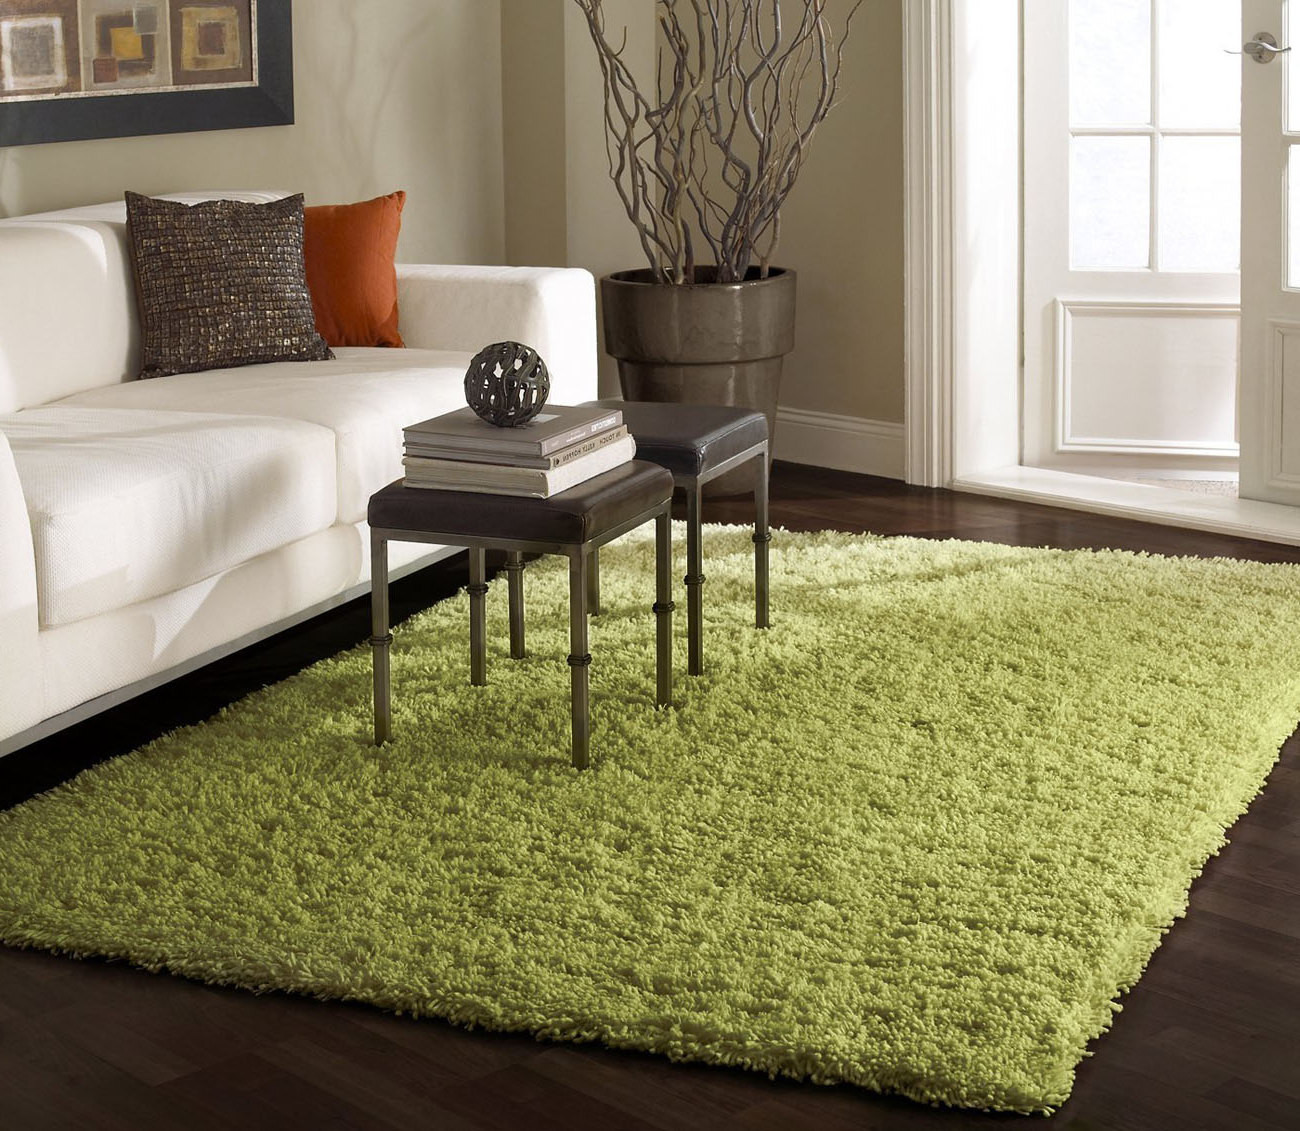 Rugs For Living Room Ideas
 Rugs for Cozy Living Room Area Rugs Ideas